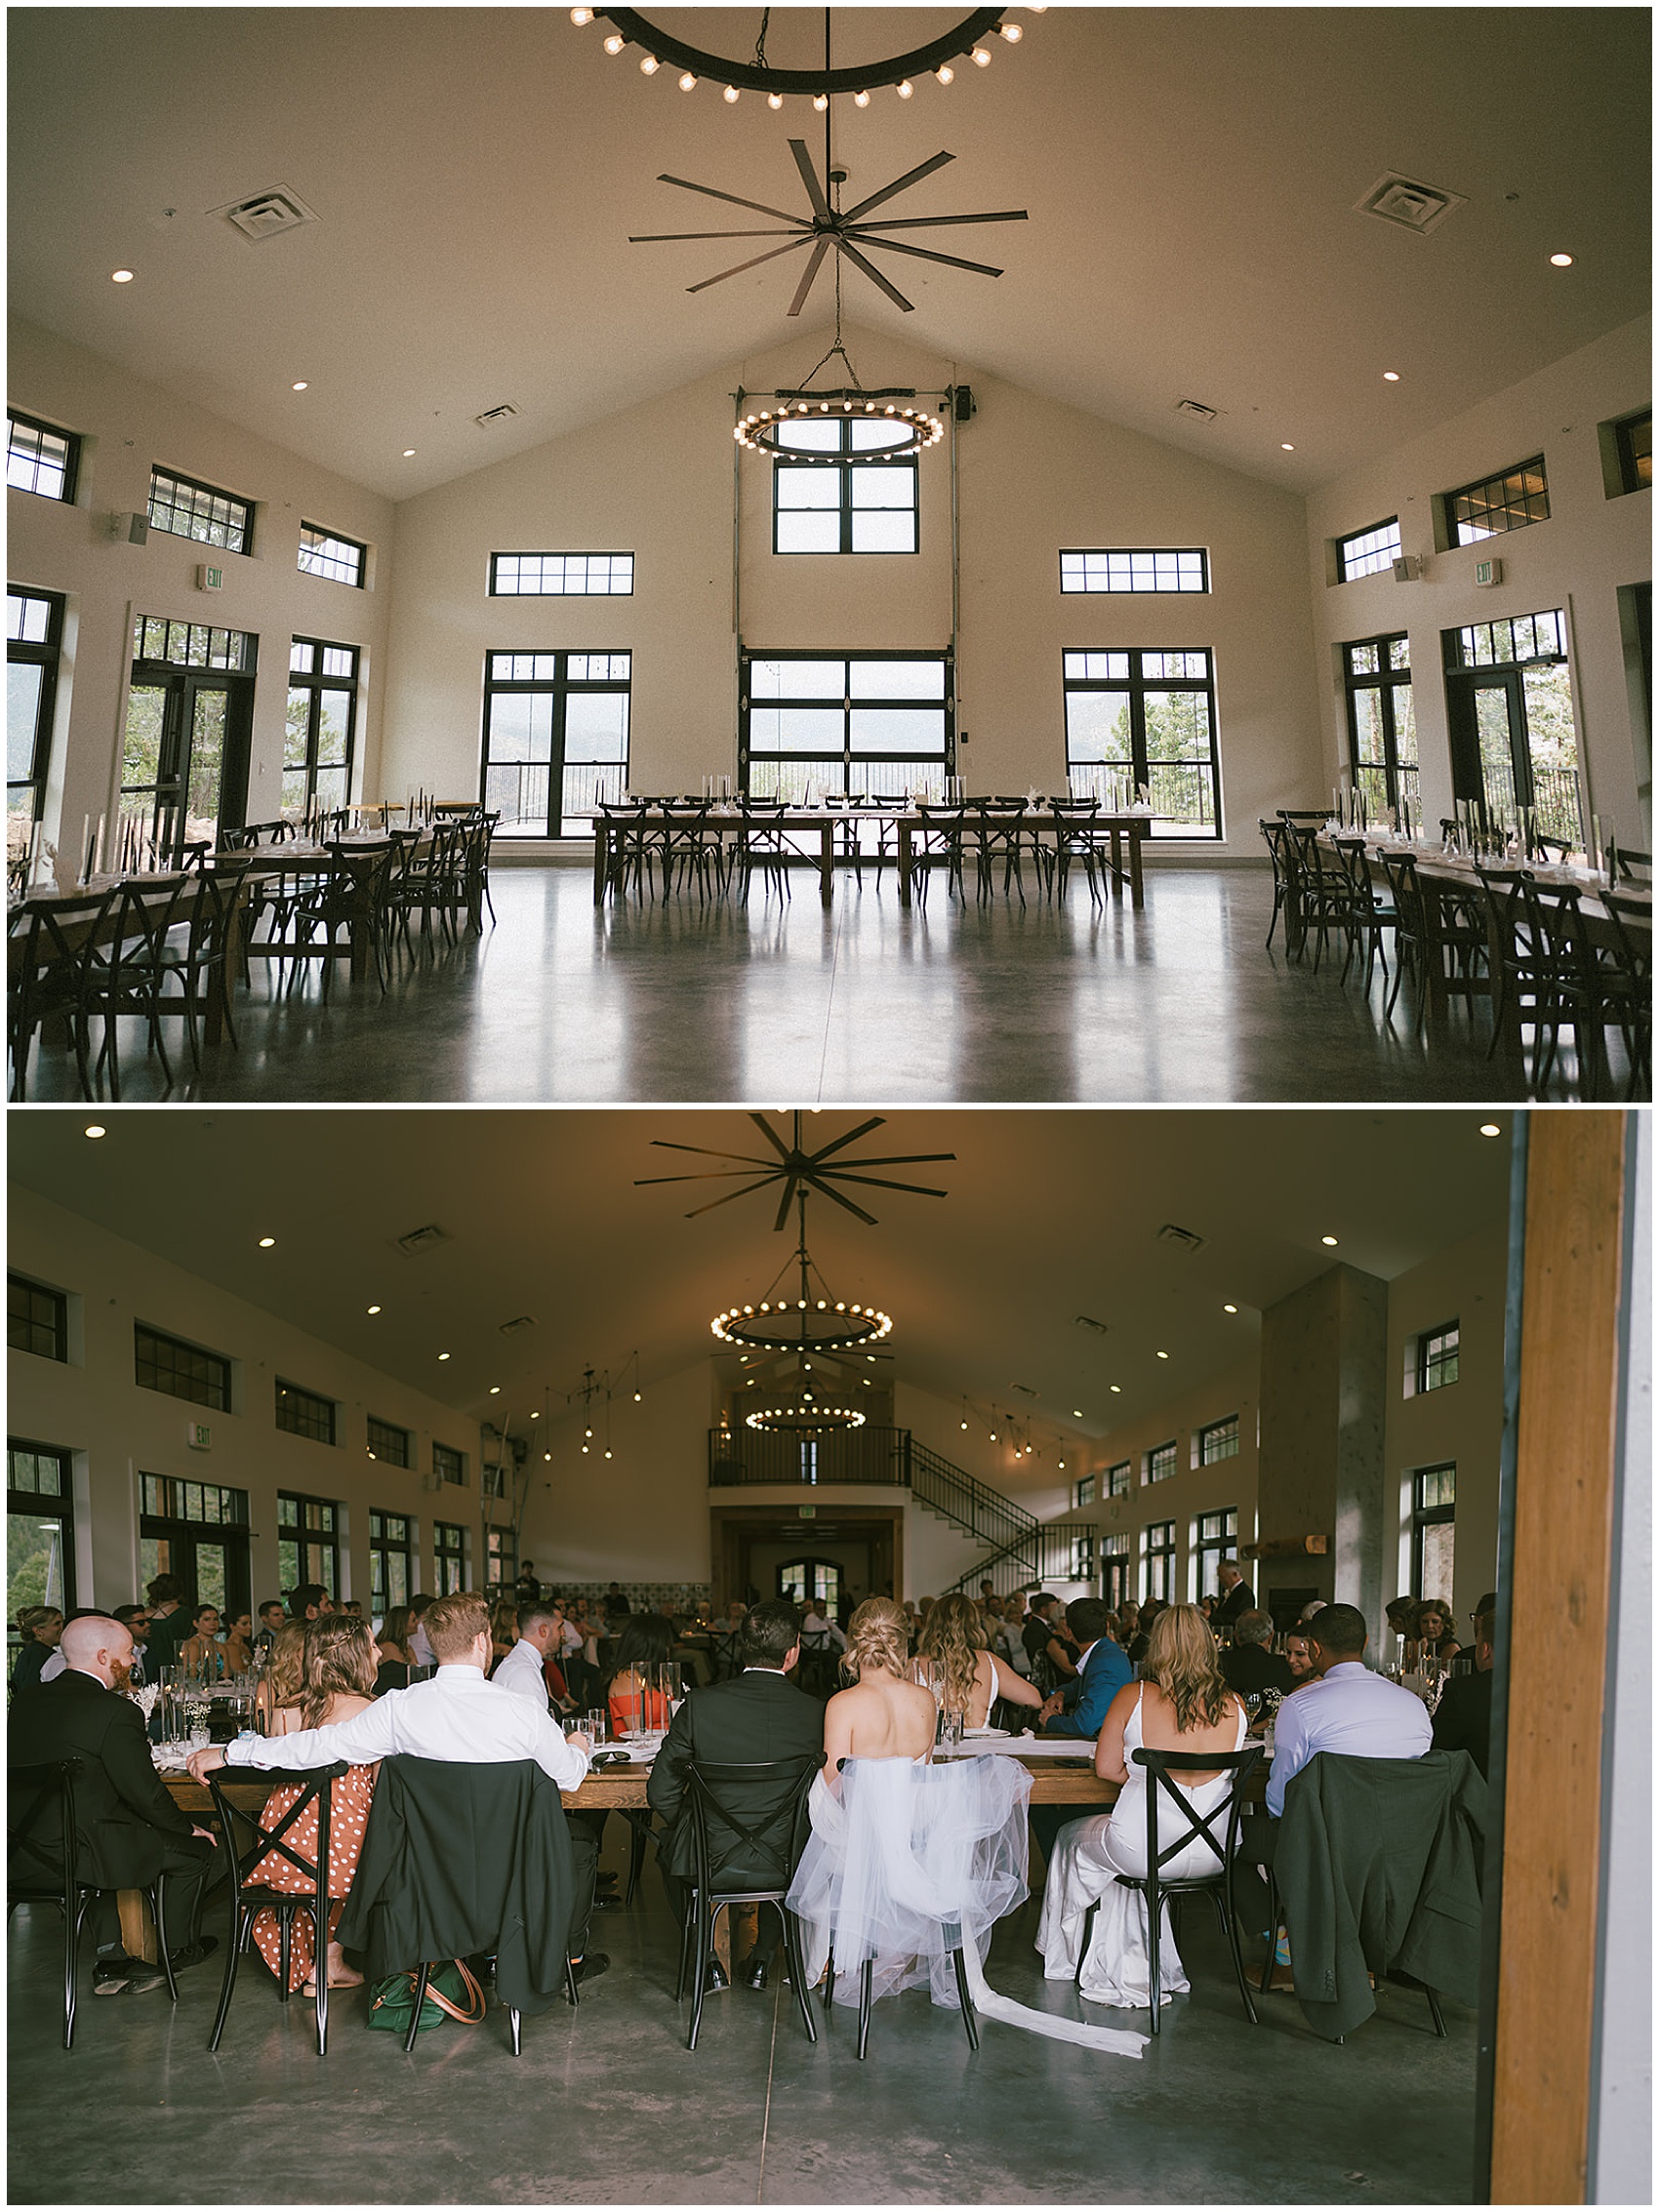 Details of the empty and full north star gatherings wedding reception